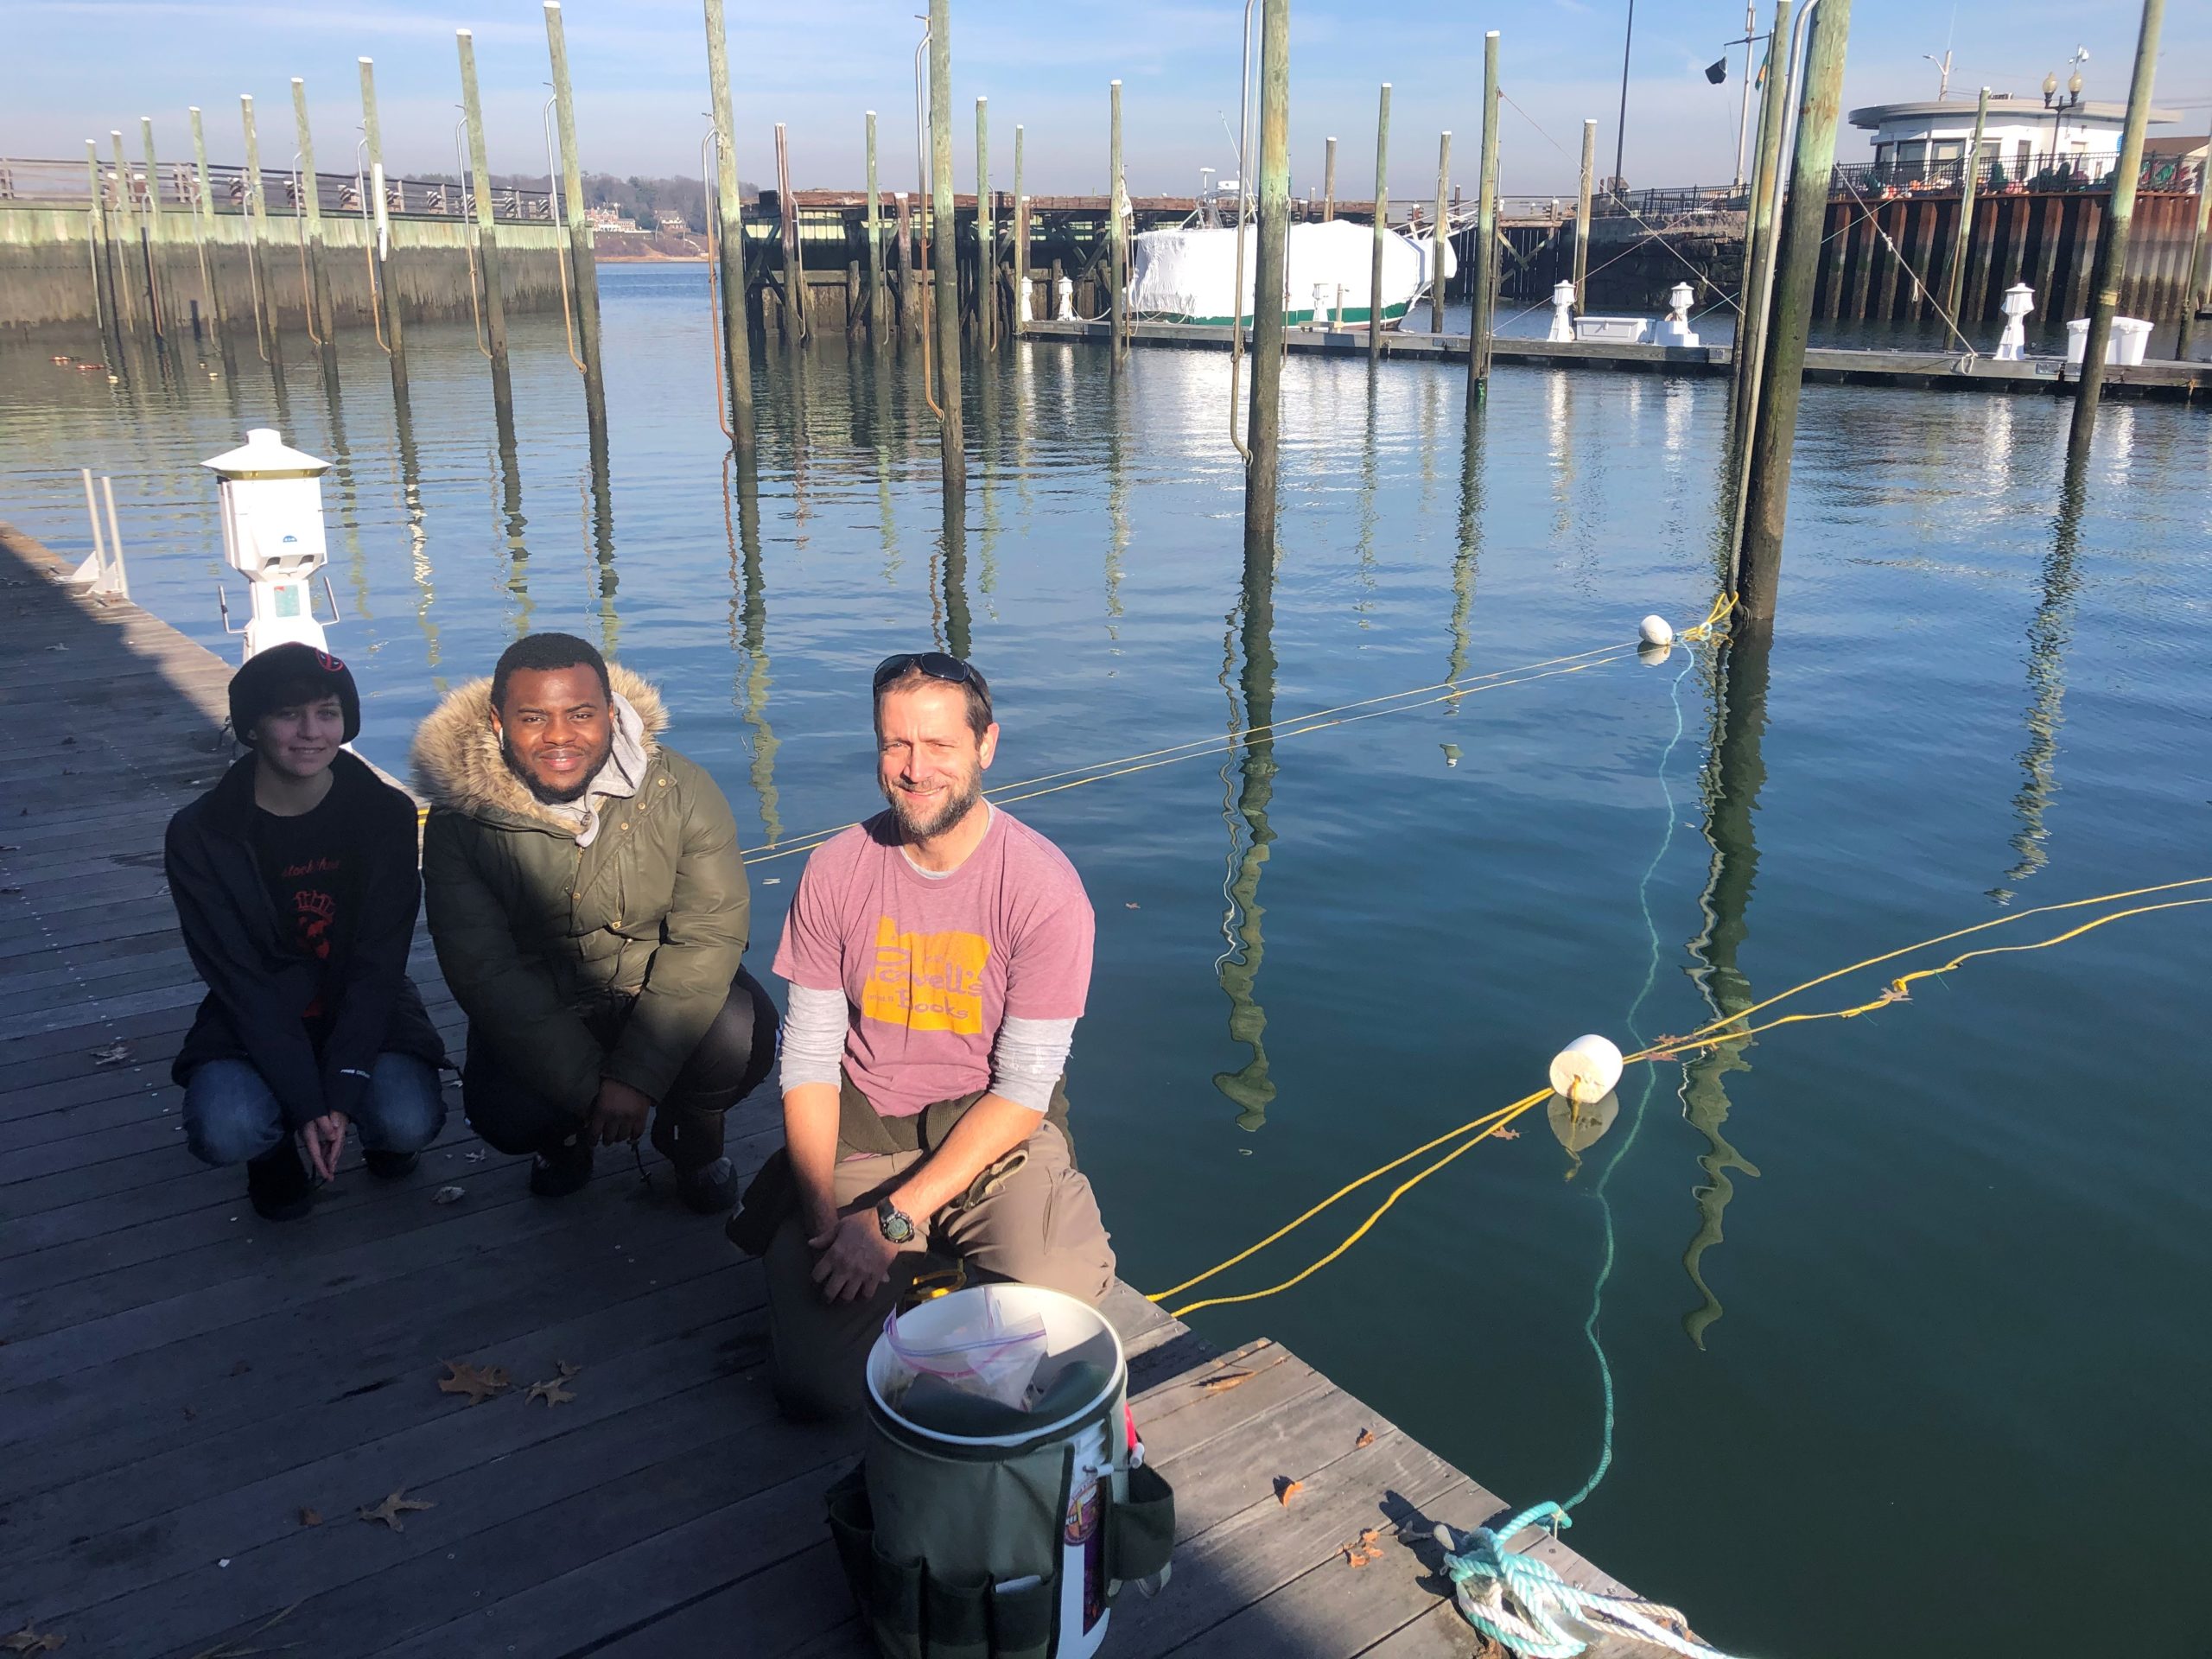 Dr. Aaren Freeman, a marine scientist at  Adelphi University (right), and  Adelphi students Amanda Hornung and Thierno Diallo pose for a picture after a day of seeding long lines with juvenile kelp seed. Photo courtesy of Dave Gugerty.